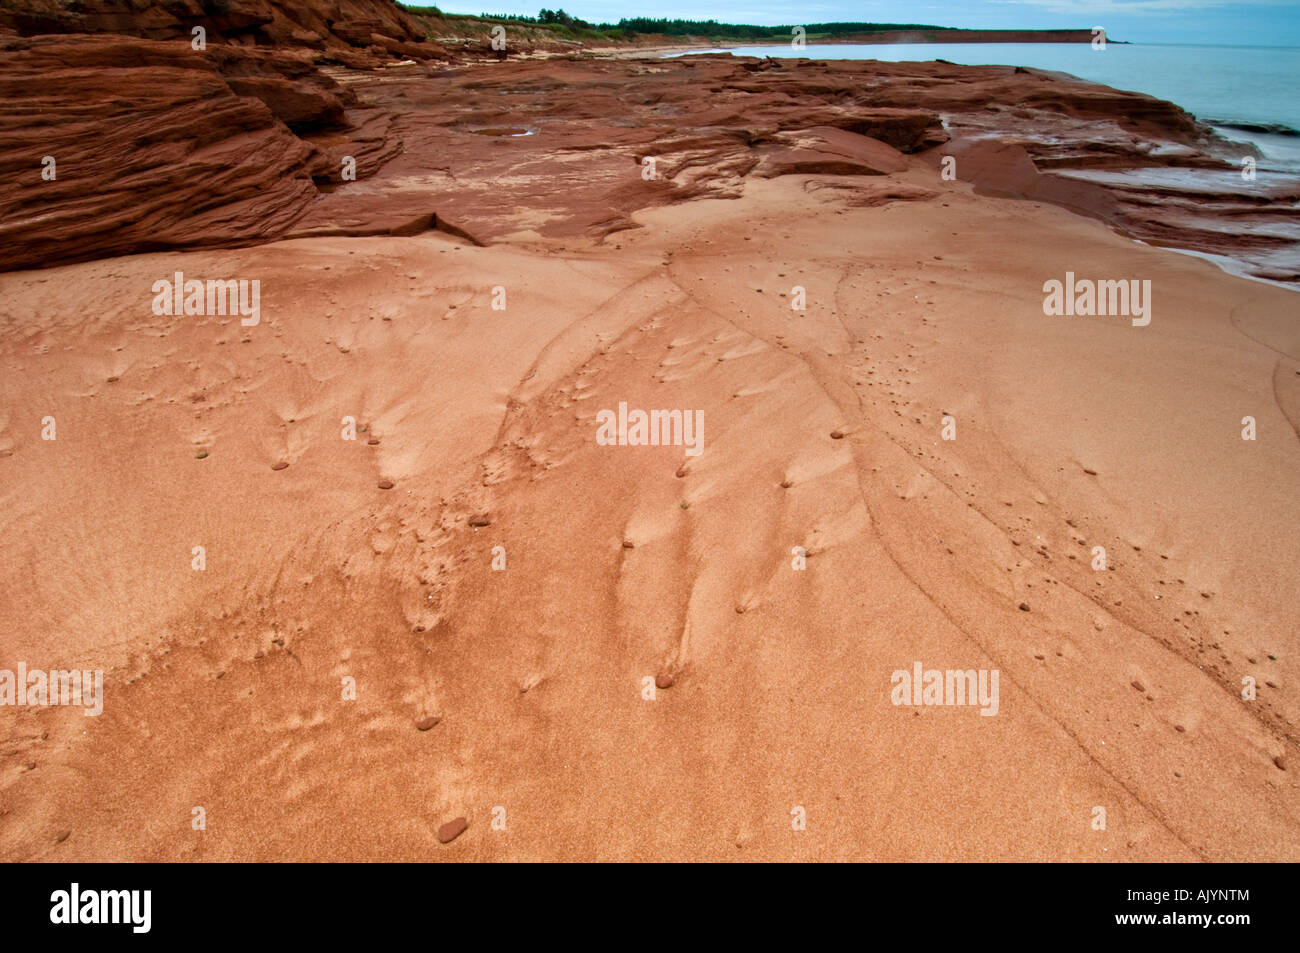 Beach sand and red rocks with runoff patterns, Campbell's Cove, PE/PEI Prince Edward Island, Canada Stock Photo